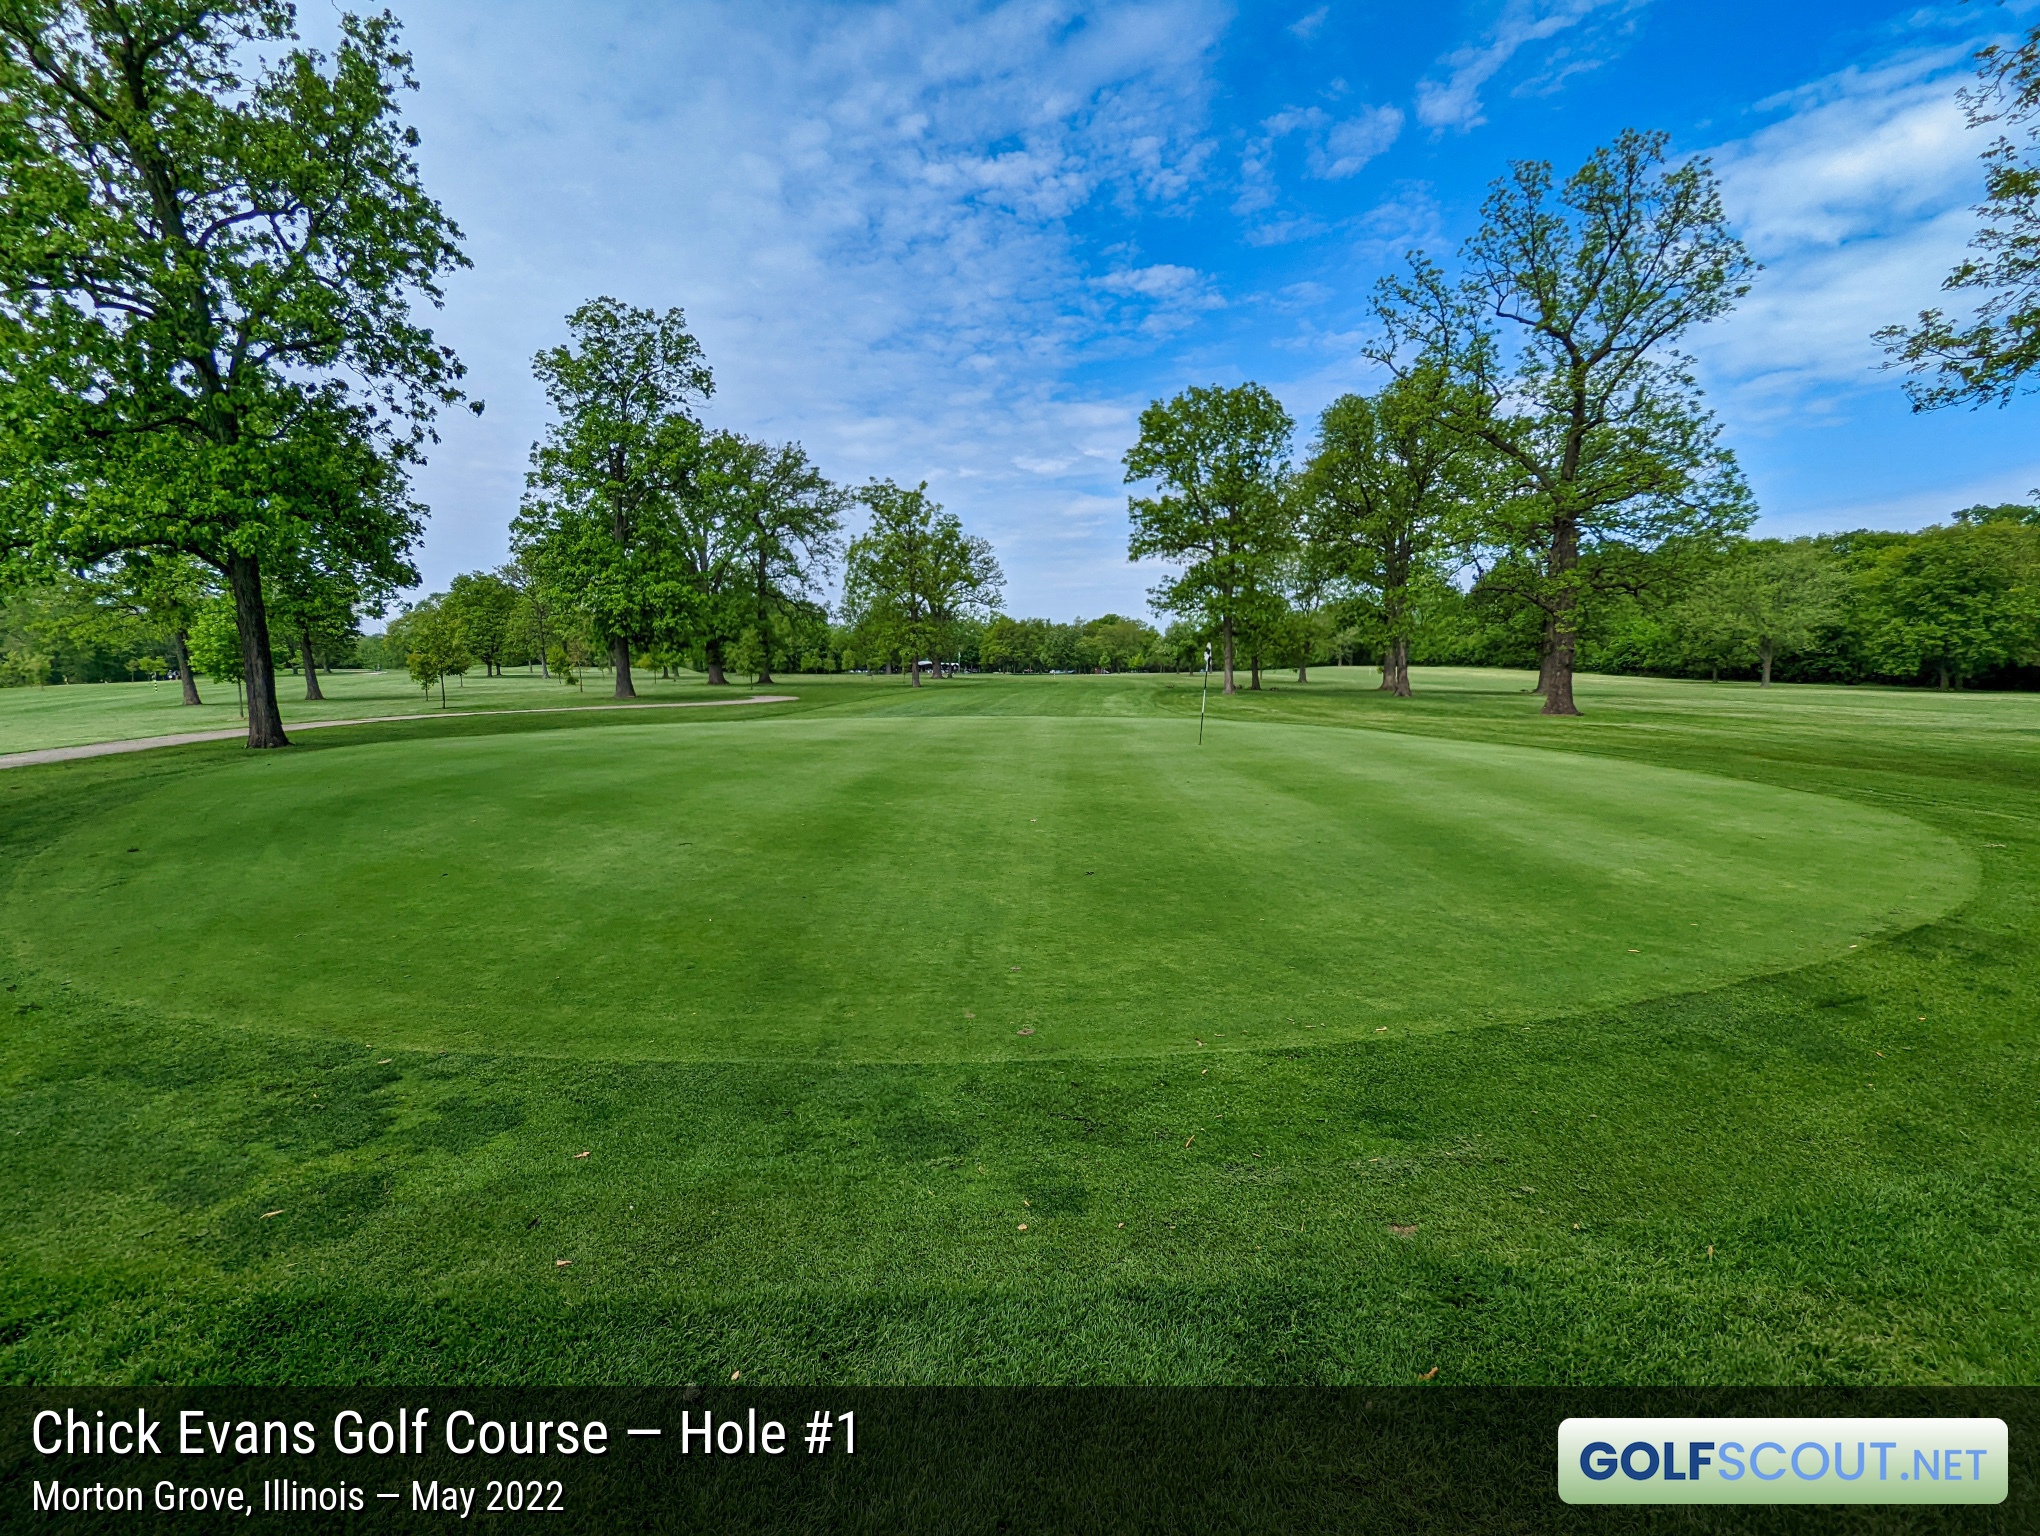 Photo of hole #1 at Chick Evans Golf Course in Morton Grove, Illinois. 